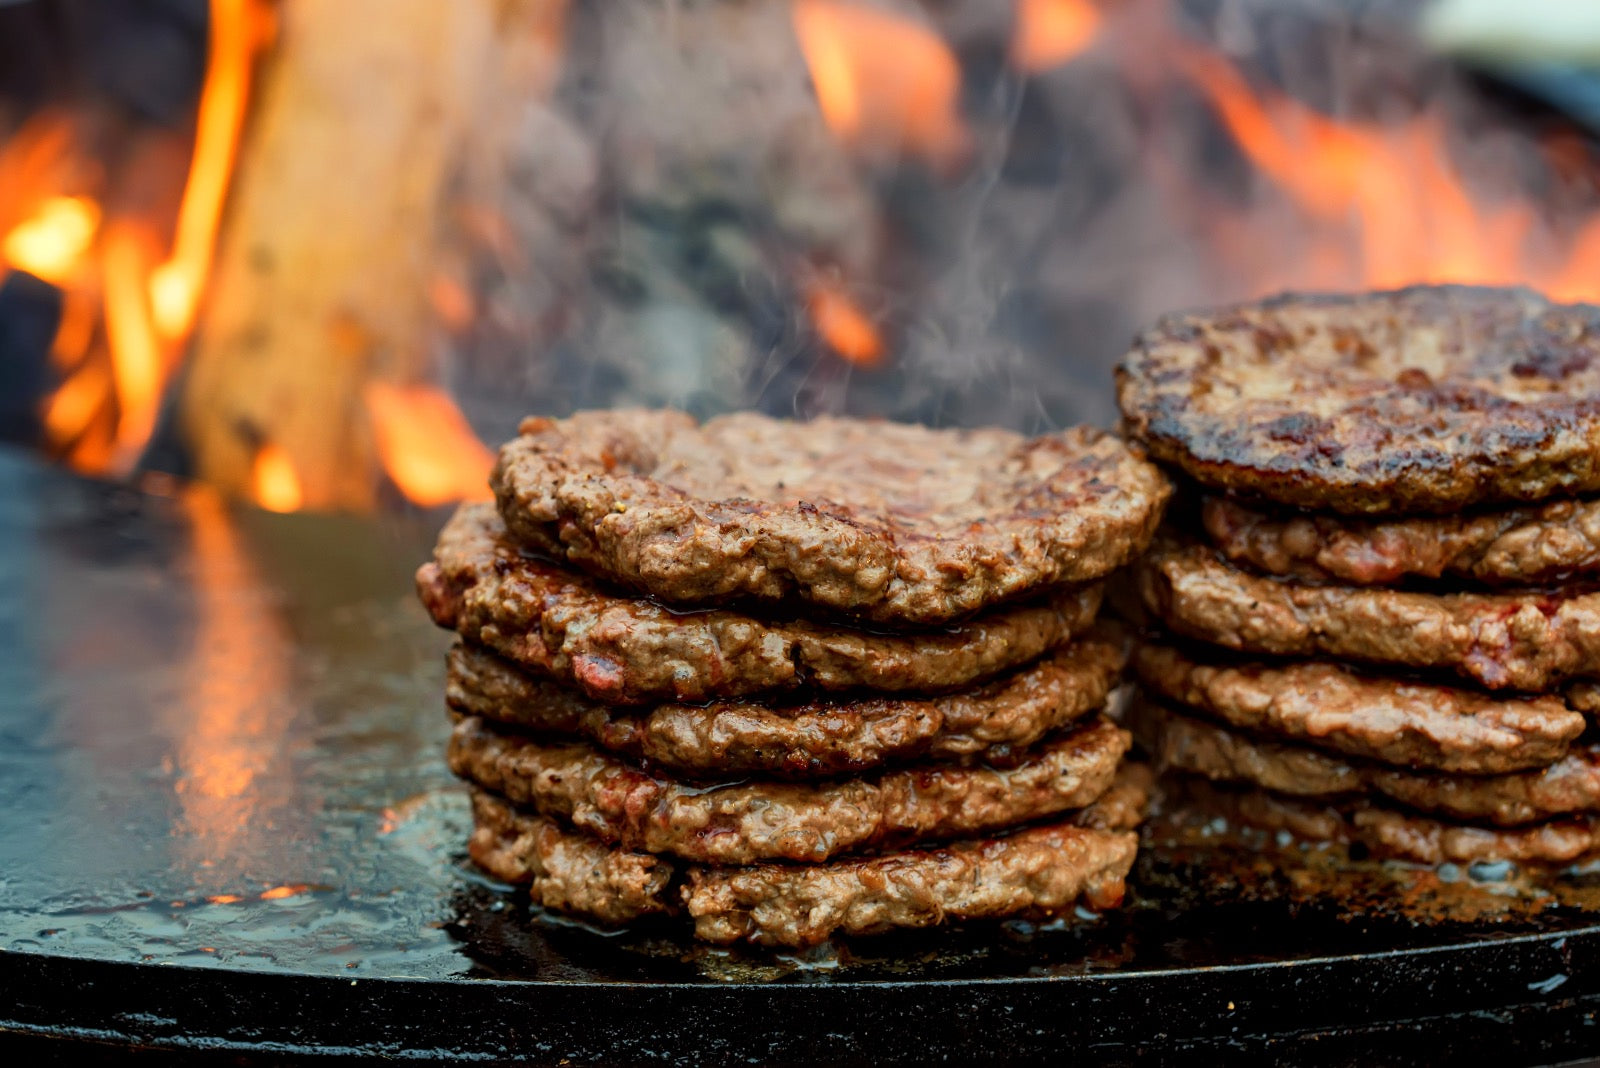 Top 5 Meat & Seafood Items That Can Help Build Immunity - Bison Or Beef Primal Burger Blends - Beck & Bulow